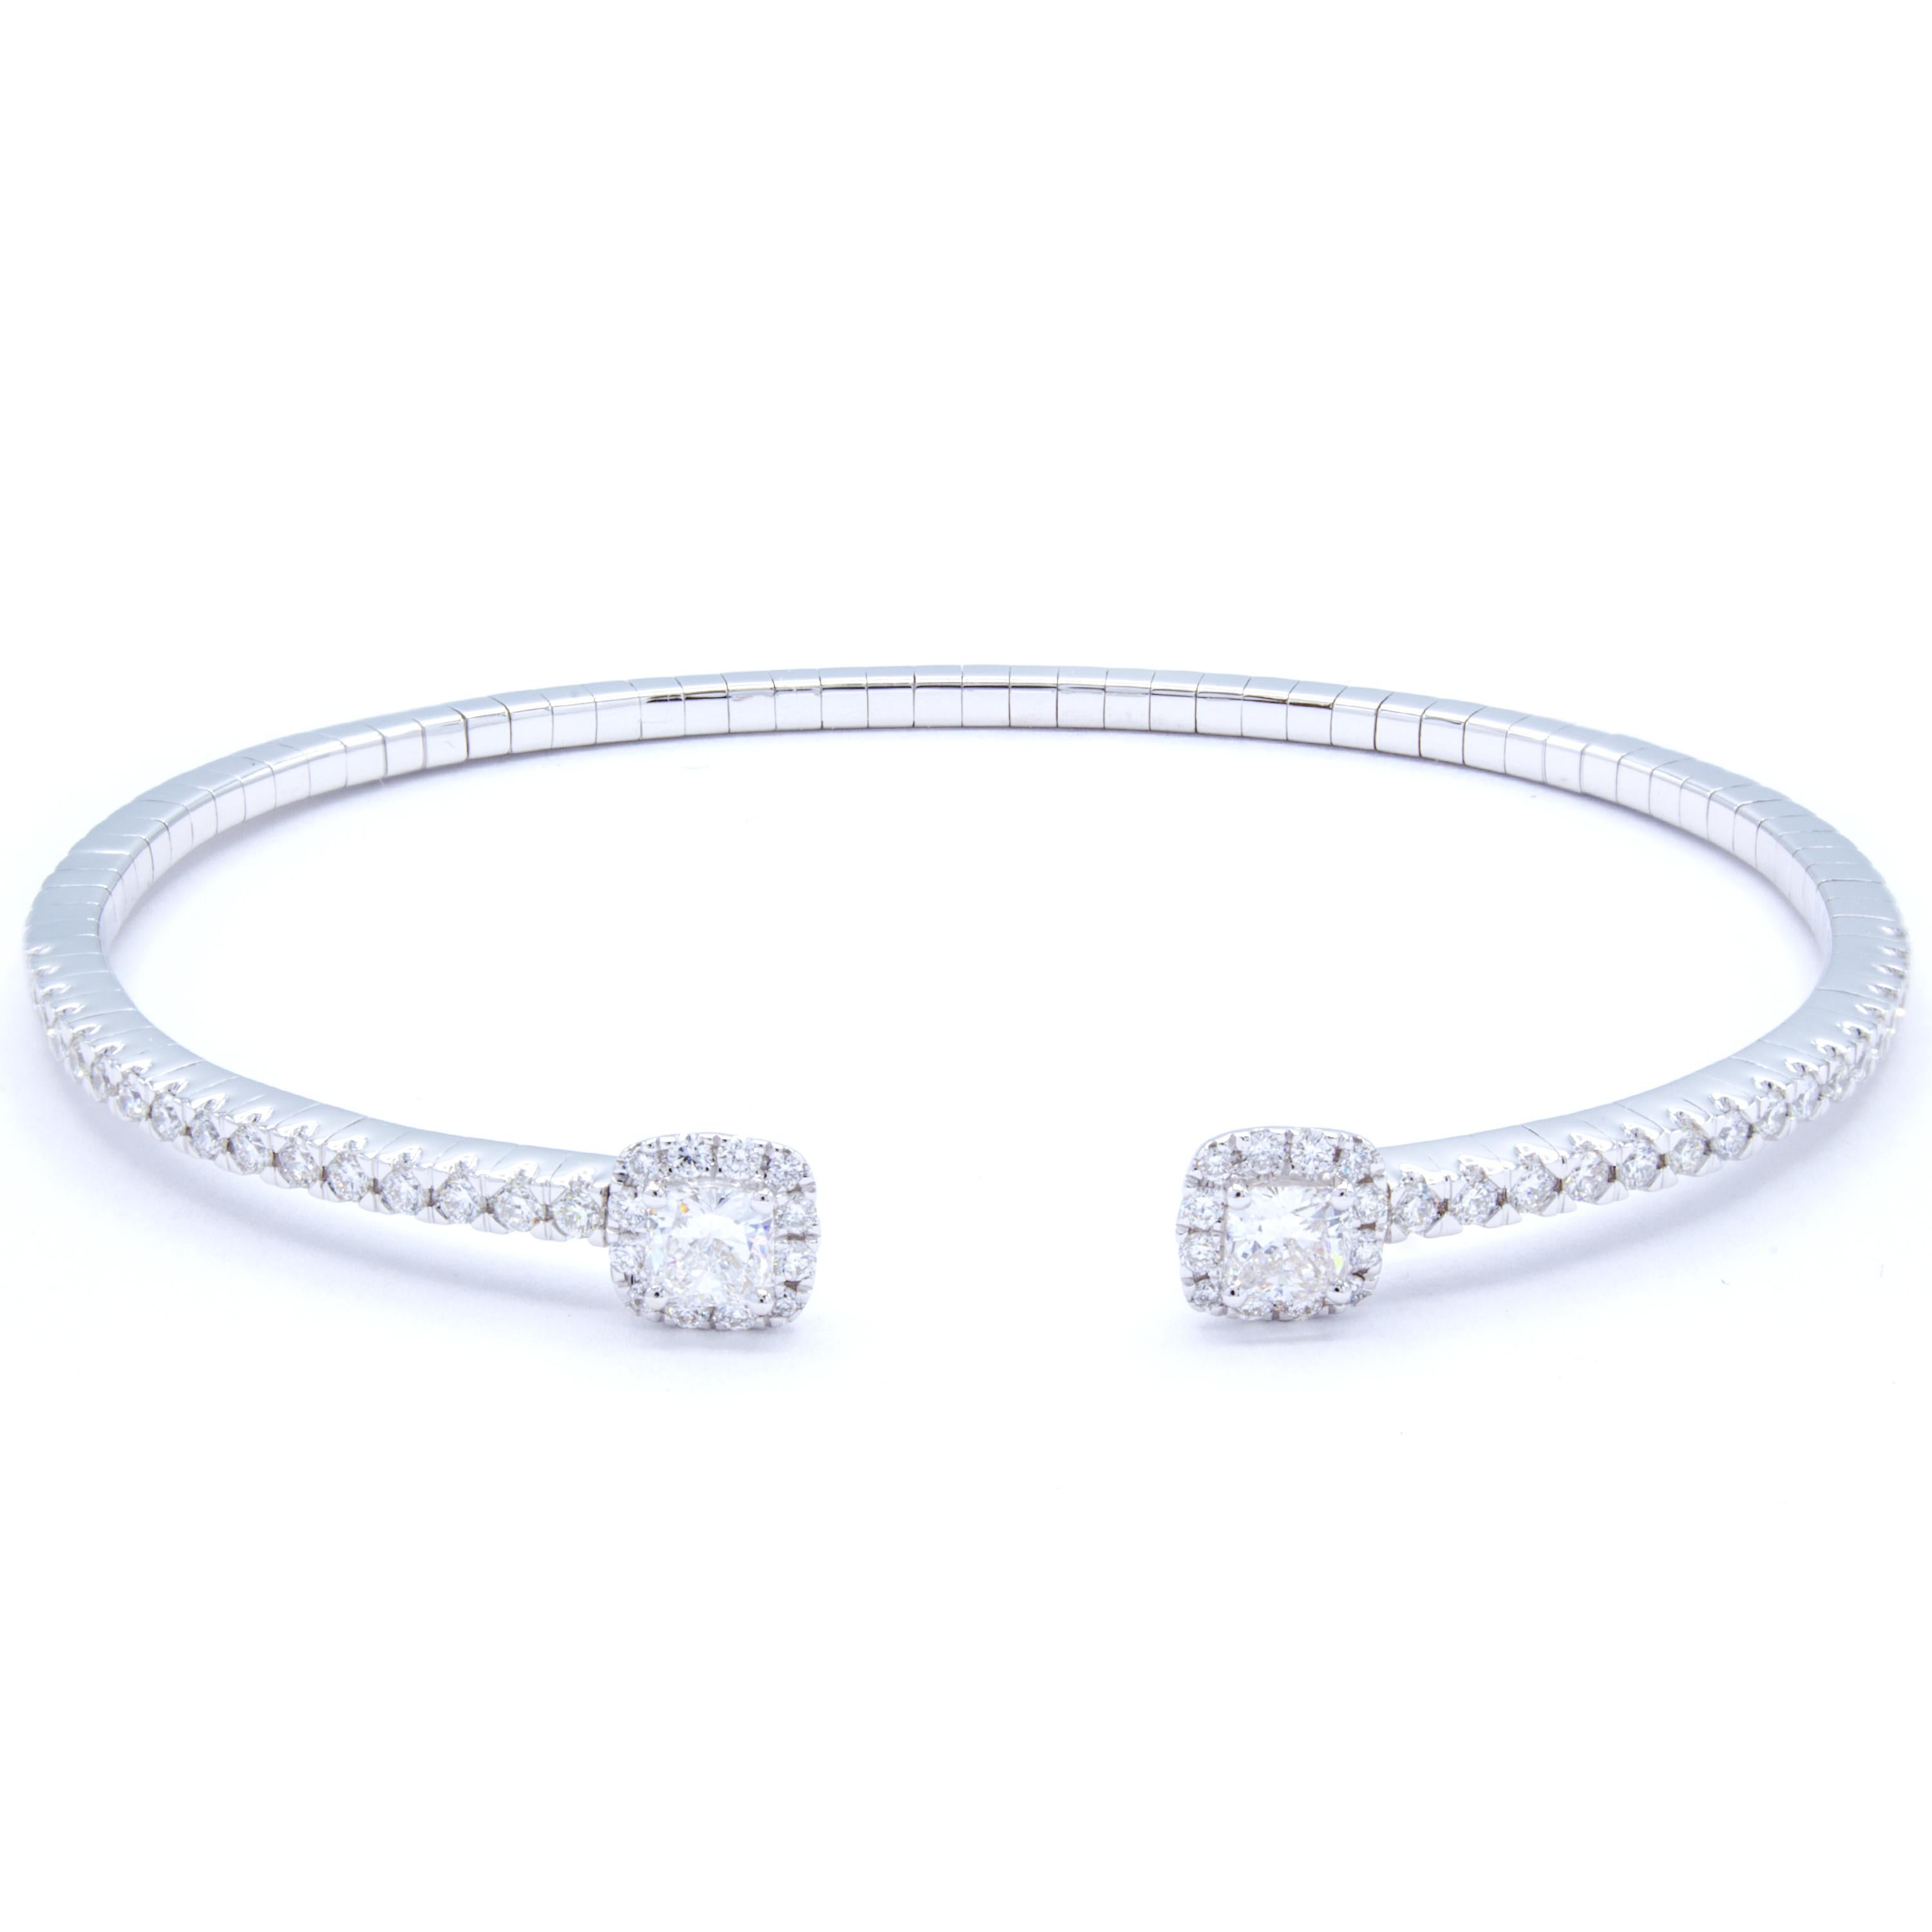 Delightfully bright 18Kt white gold delicately wraps around the wrist in an open semi circle bangle bracelet. Across the bracelet, over a carat of glittering round brilliant diamonds cast a fiery display that culminates in two square shaped diamond